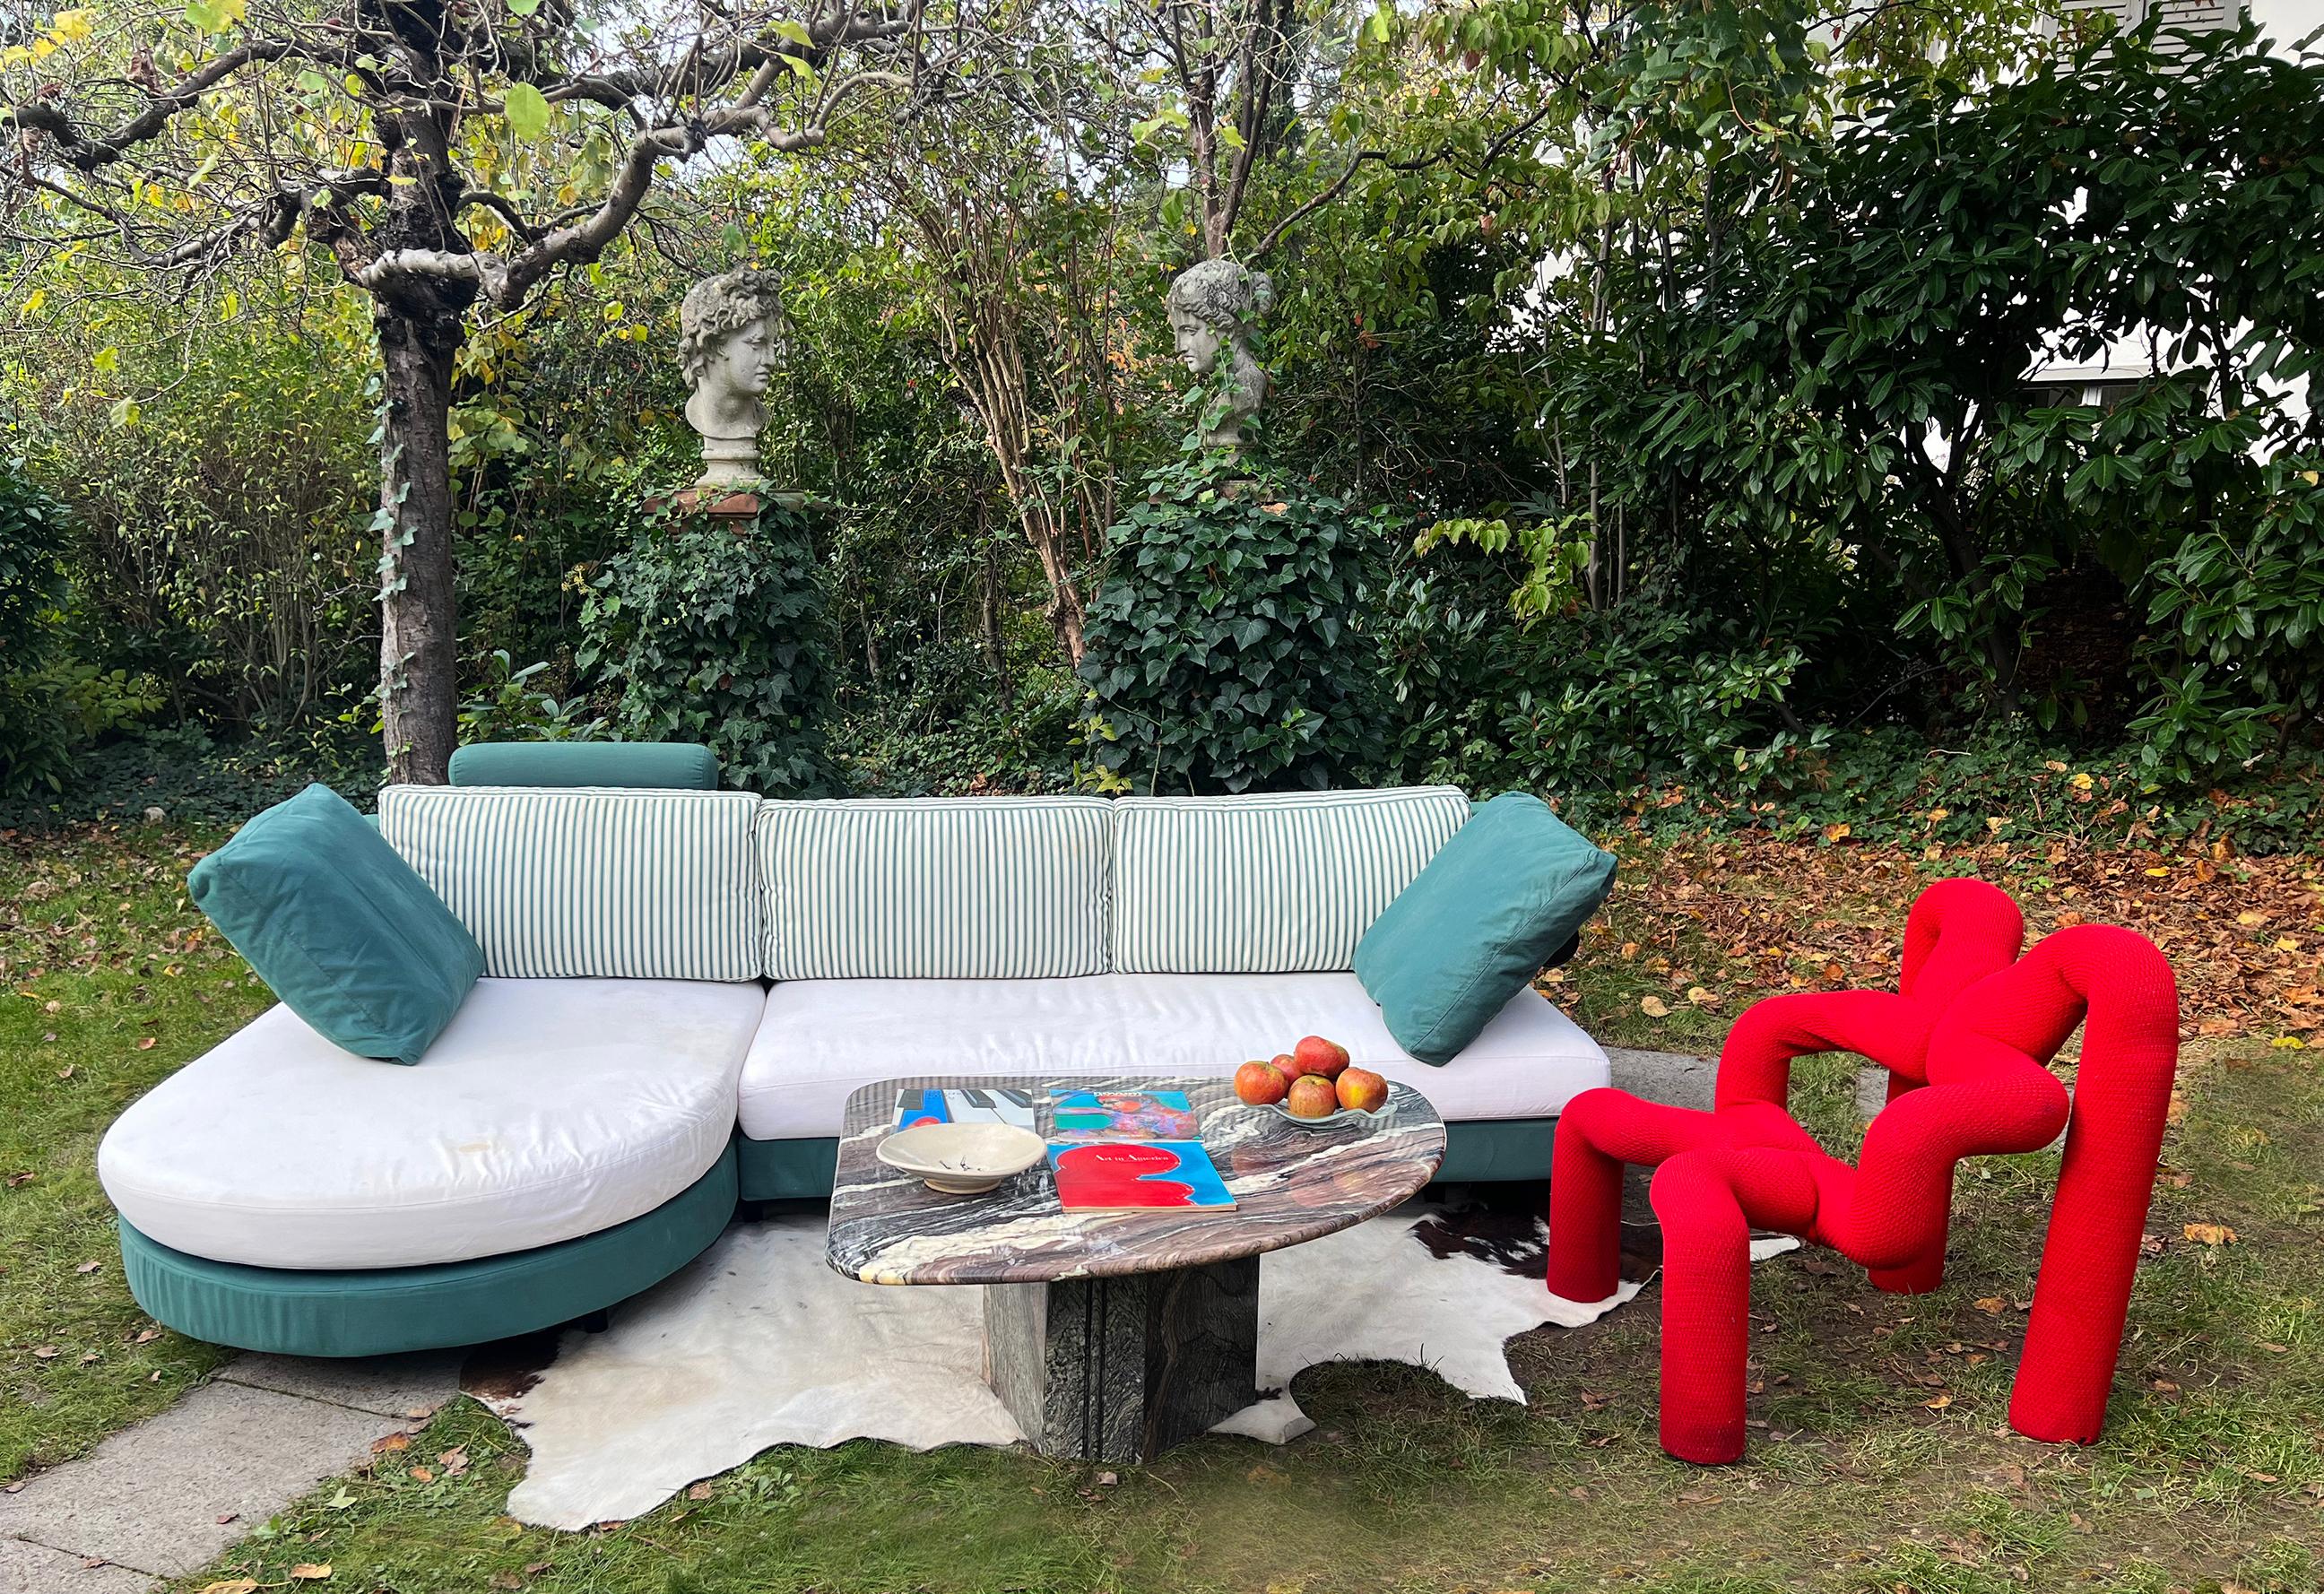 Magnificent and very comfortable vintage Antonio Citterio 1980s Sity Sofa for B&B Italia. The Manufacturer's mark is present. The sofa is completely made of a very high quality eggshell color and green textile with thick cushions and supportive